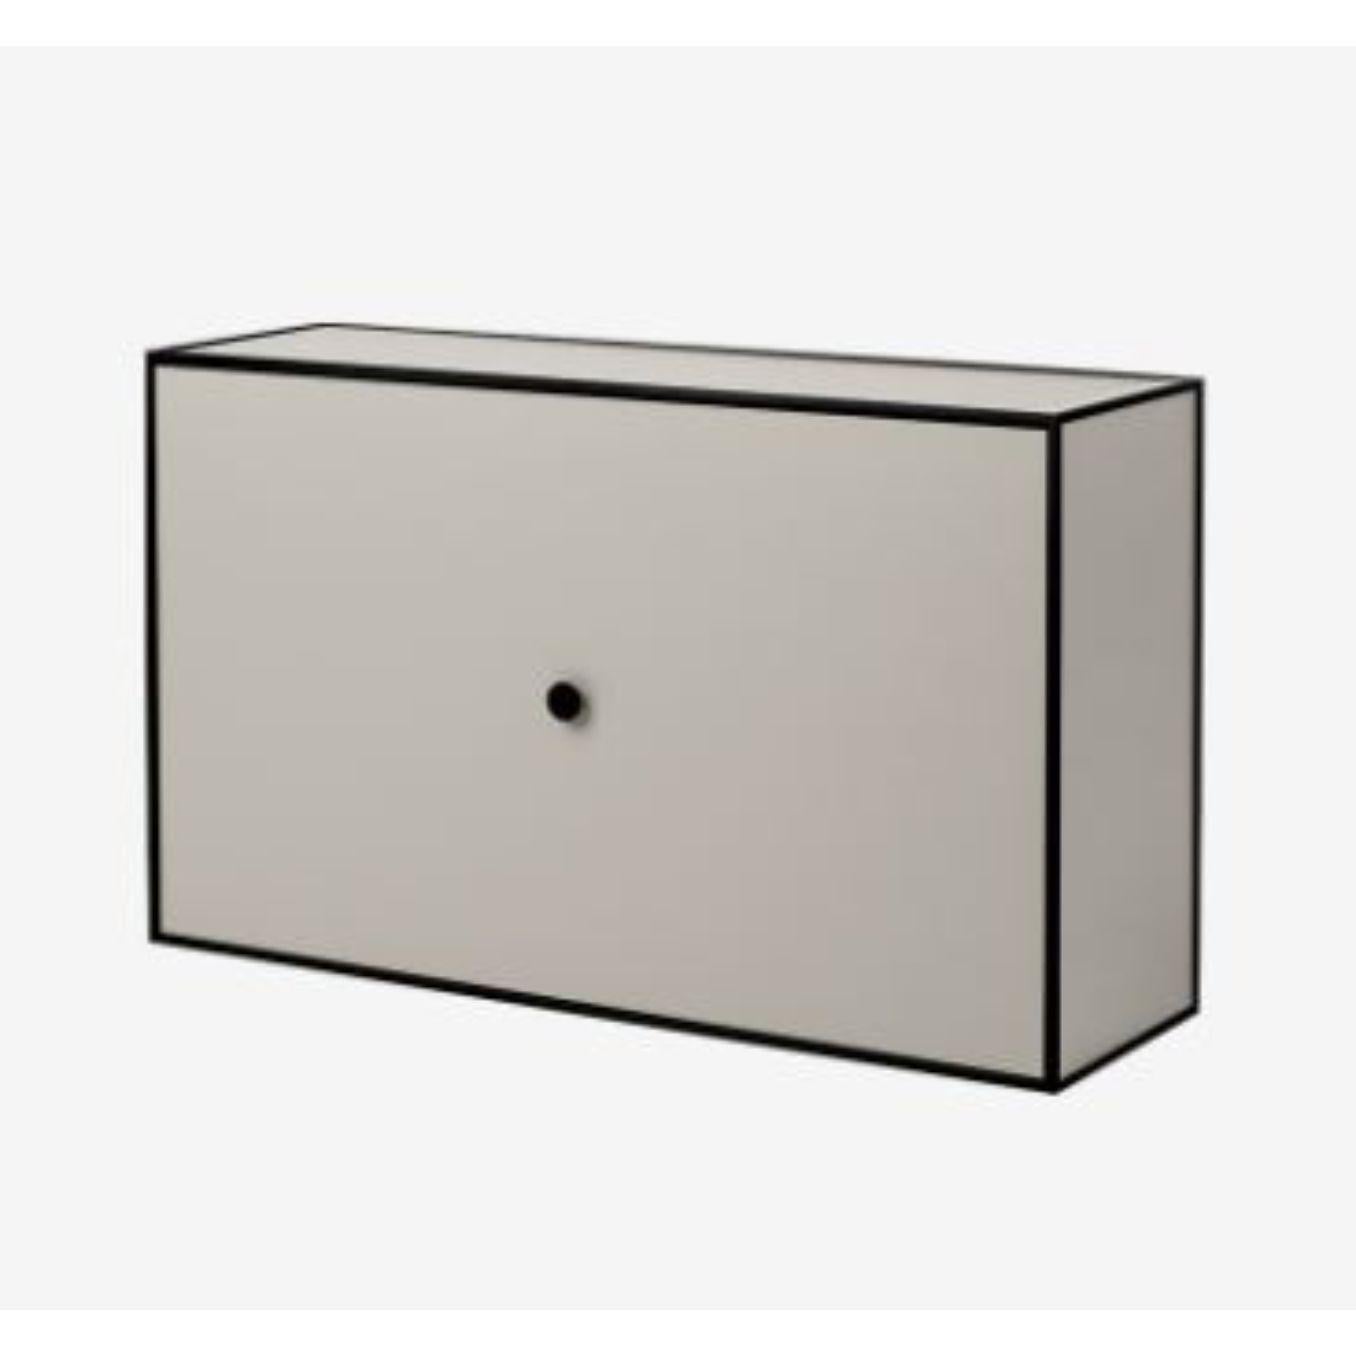 Sand frame shoe cabinet by Lassen
Dimensions: D 70 x W 21 x H 42 cm 
Materials: finér, melamin, melamine, metal, veneer
Also available in different colours and dimensions.
Weight: 20 Kg

By Lassen is a Danish design brand focused on iconic